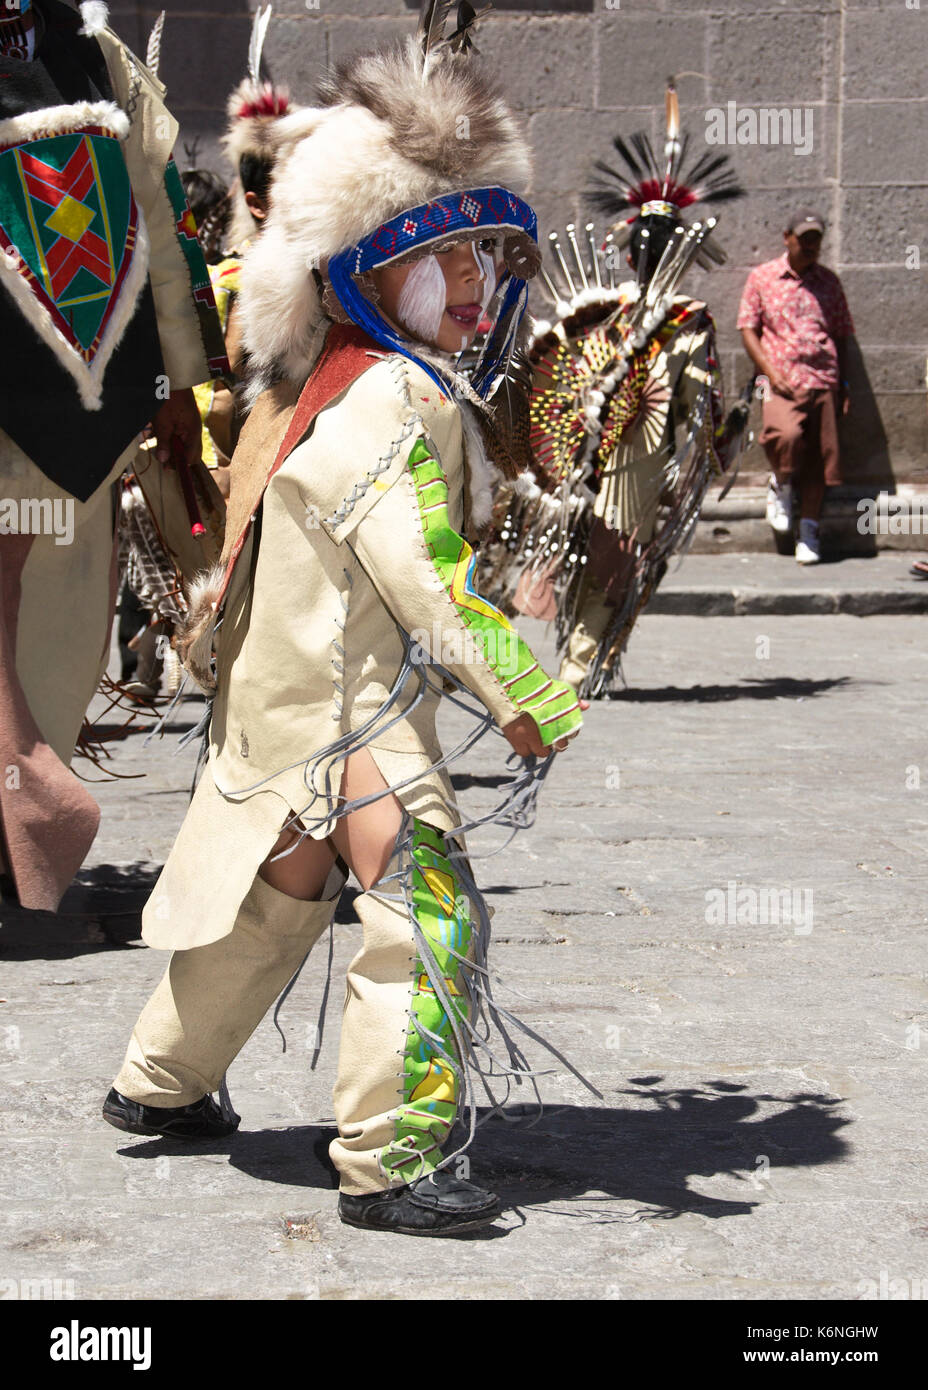 San Miguel de Allende, Guanajuato, Mexico - 2013: People perfom a traditional dance at the town's zocalo Stock Photo